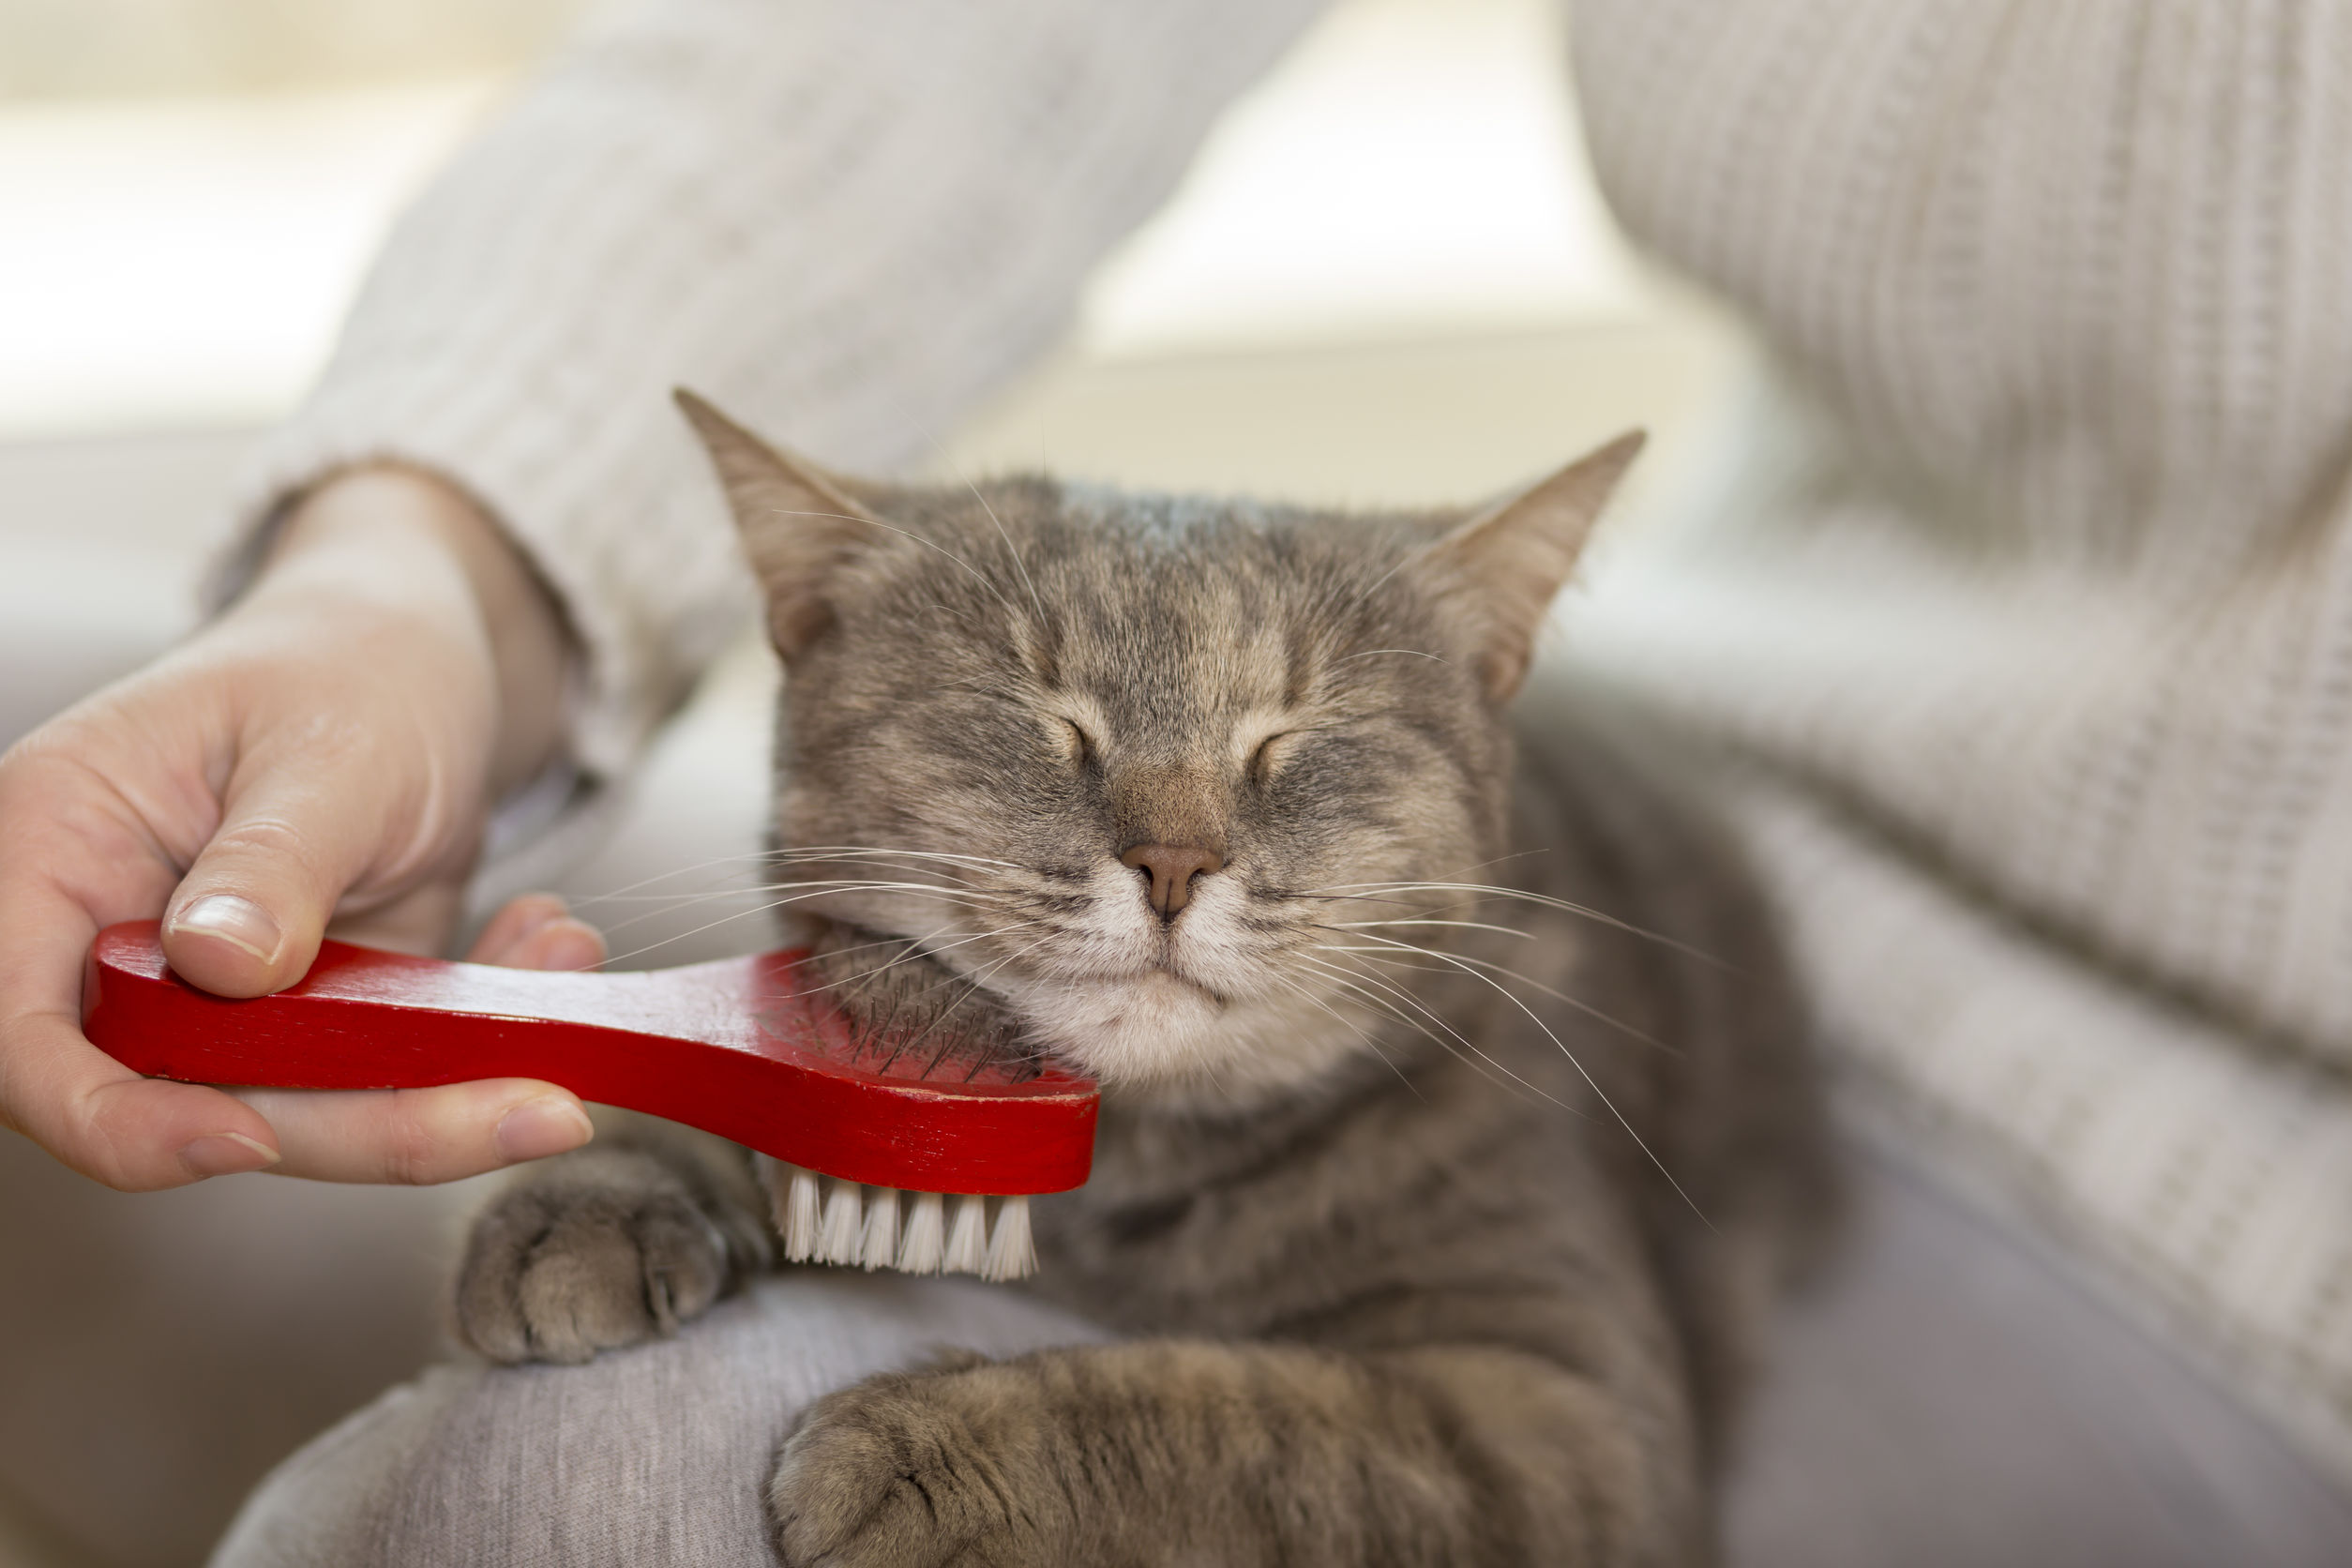 Cat being brushed